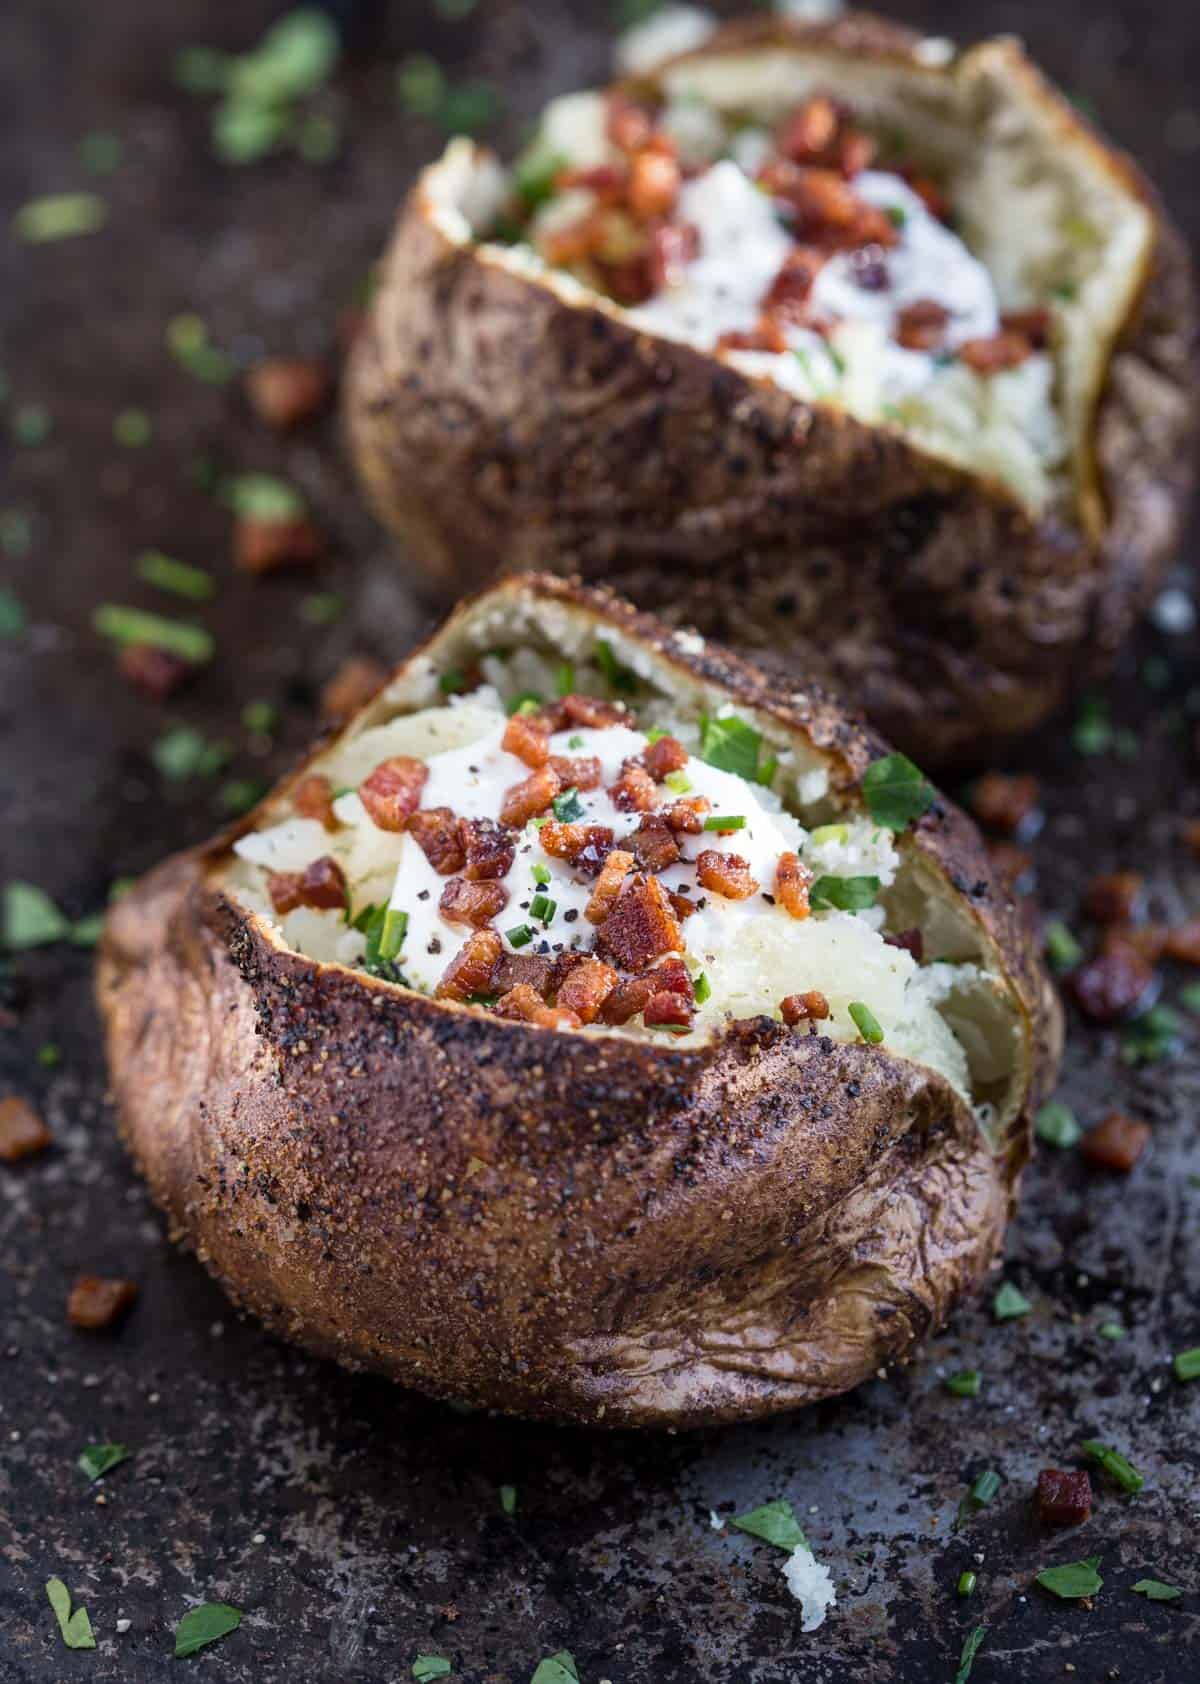 A grilled baked potato topped with sour cream, bacon, and chives 